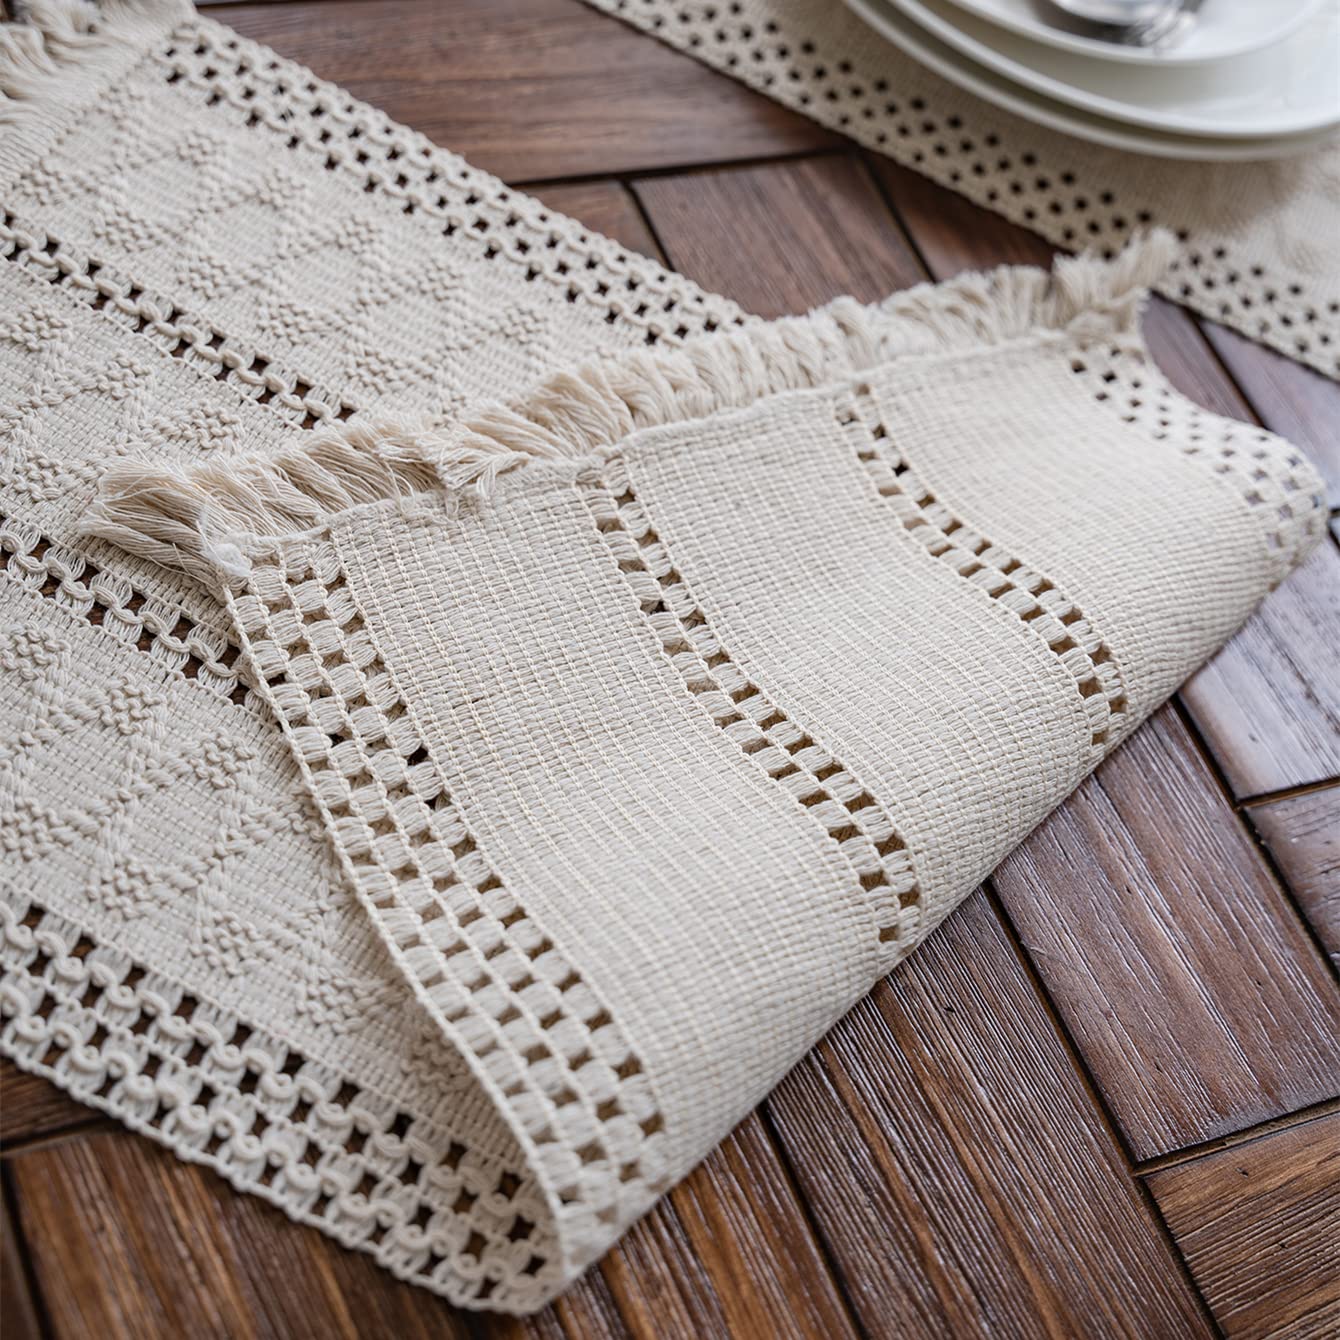 Alynsehom Macrame Table Runner Cream Beige Boho Table Runner with Tassels Hand Woven Cotton Table Runner Rustic Farmhouse Table Runner for Bohemian Kitchen Dining Table(12x71in)